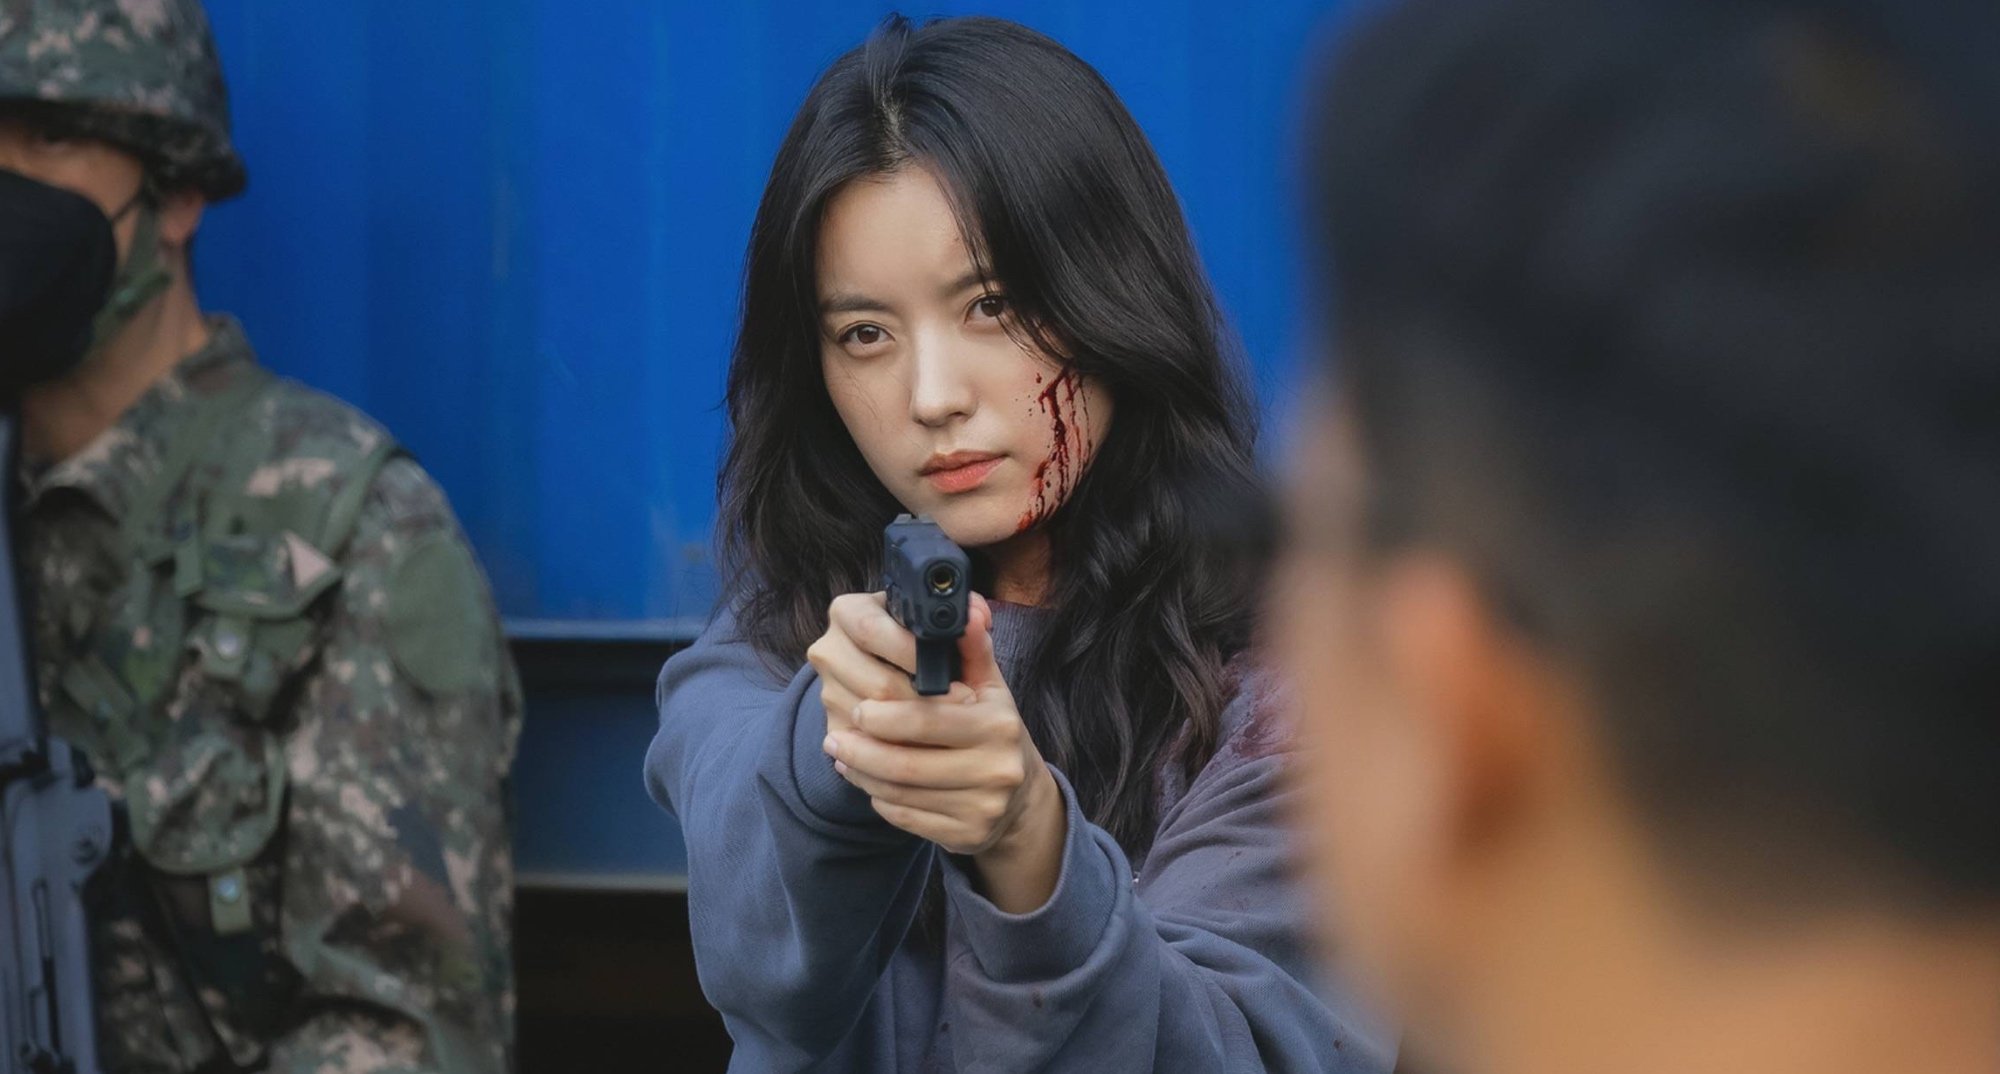 Sae-bom in 'Happiness' K-drama holding up a gun.